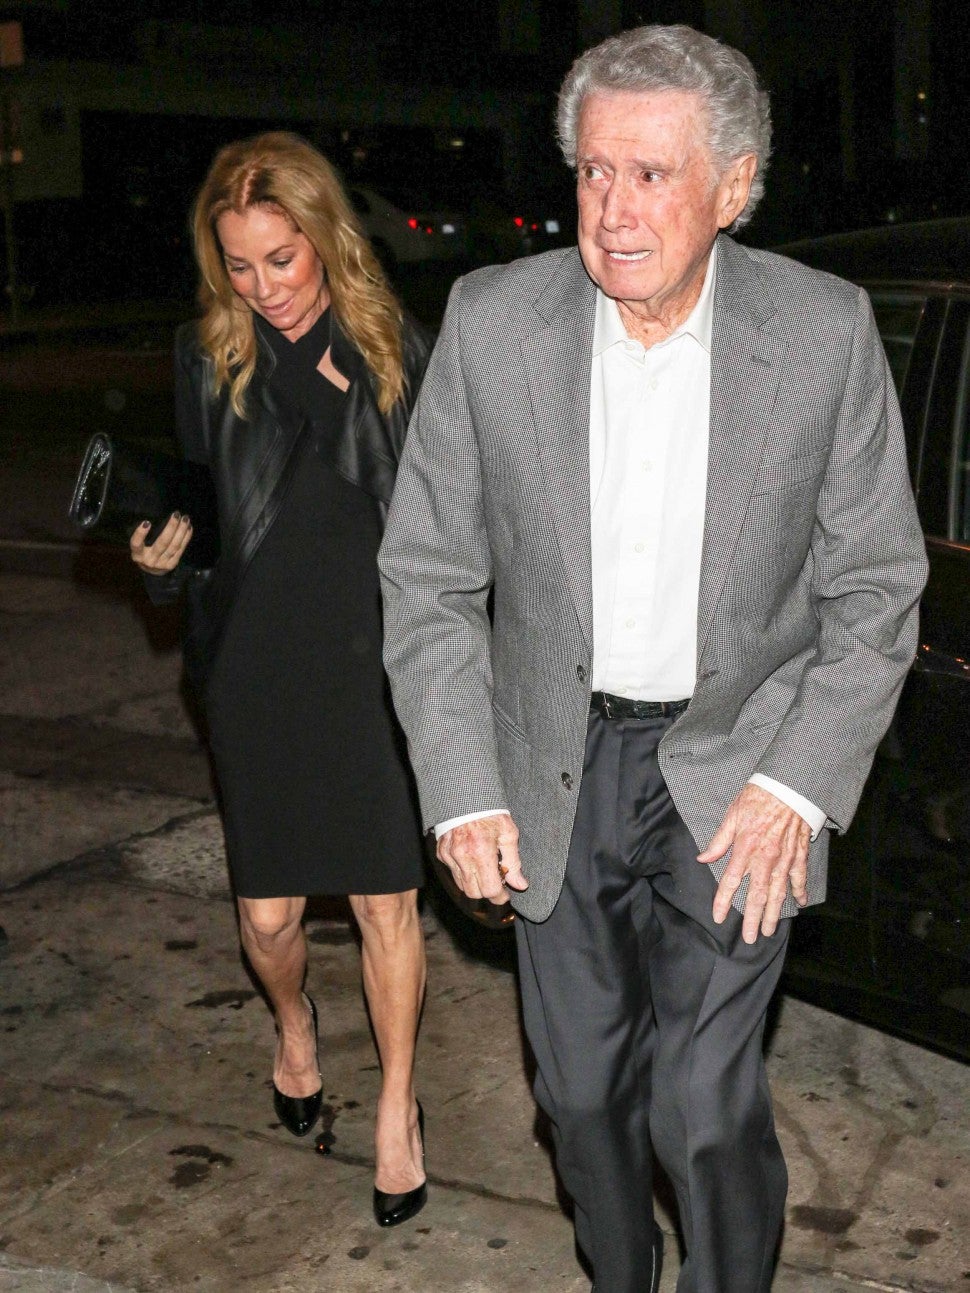 Kathie Lee Gifford and Regis Philbin are seen on January 24, 2018 in Los Angeles, California.